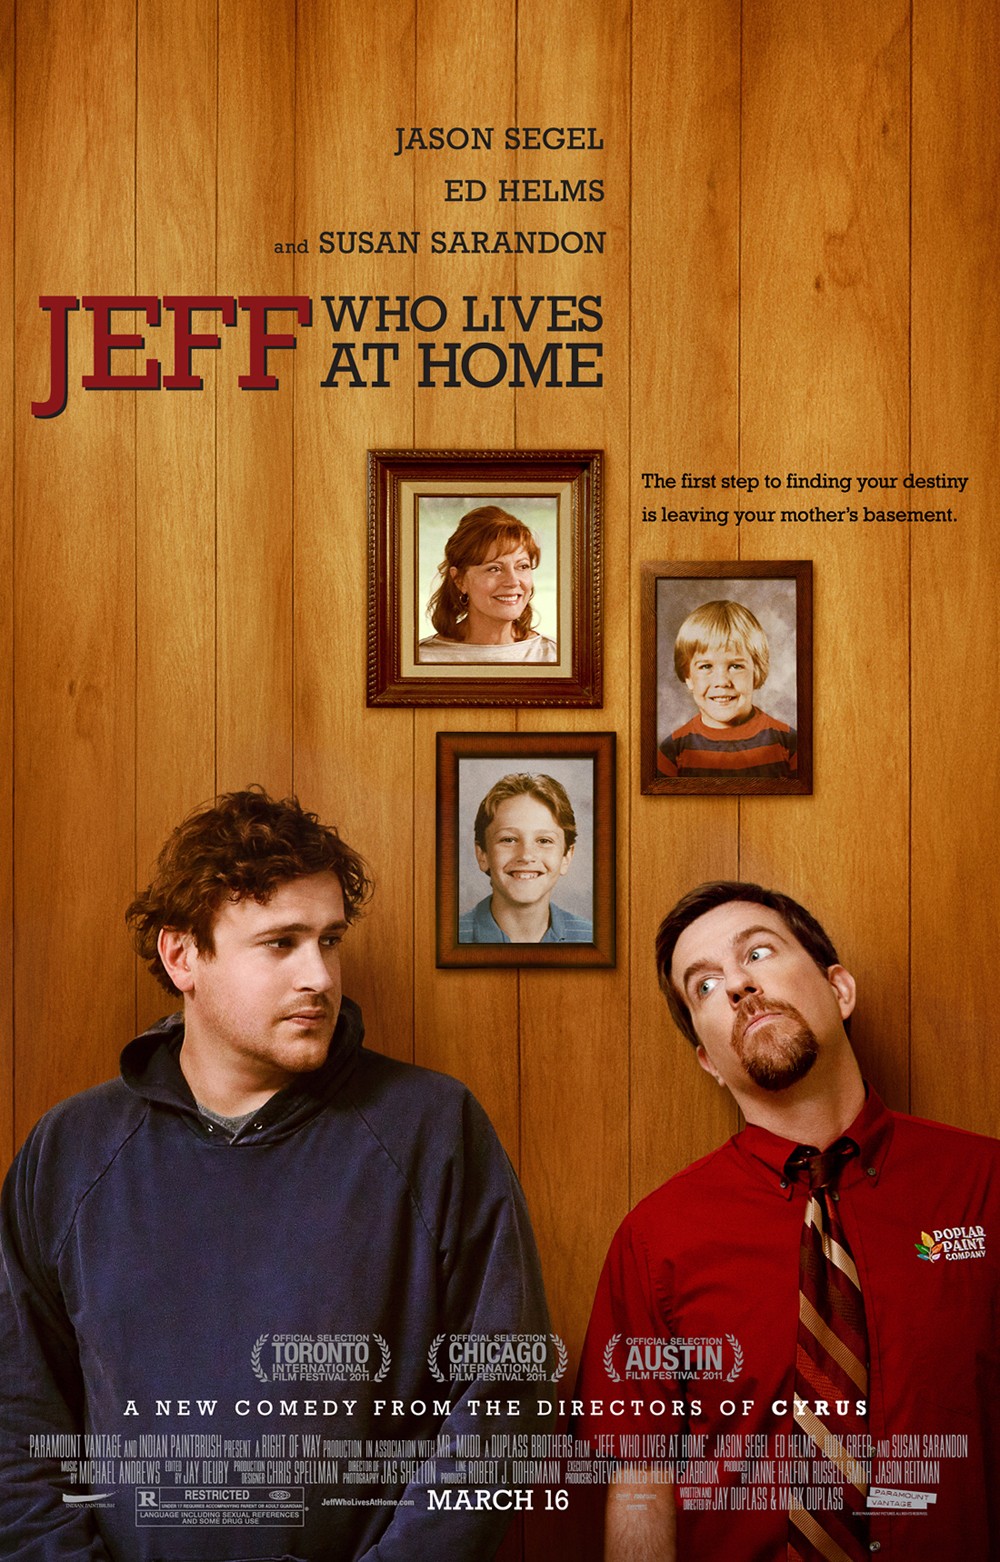 Poster of Paramount Vantage' Jeff Who Lives at Home (2012)